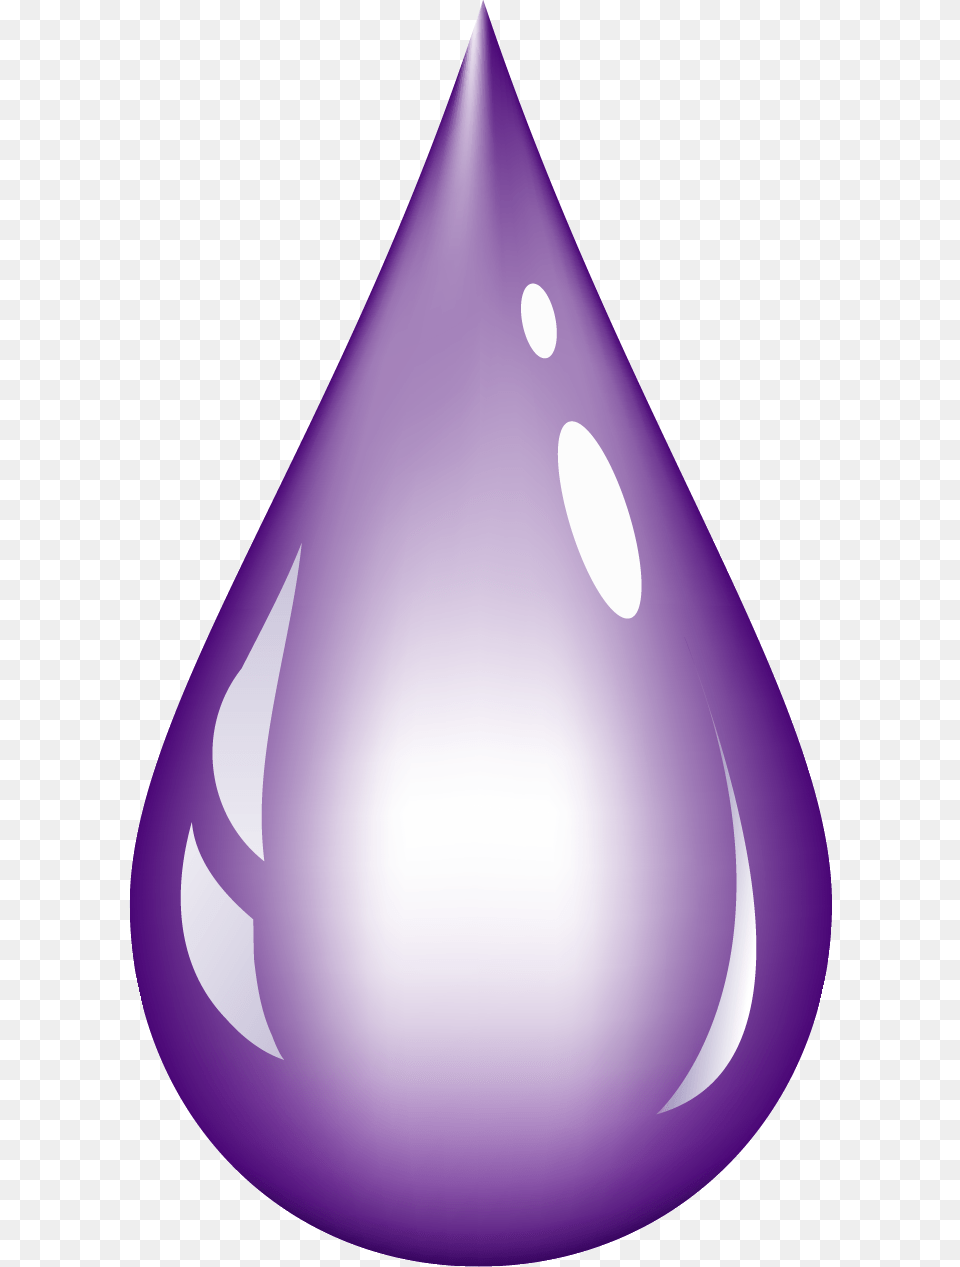 Lavender With Drop, Droplet, Purple, Astronomy, Moon Png Image